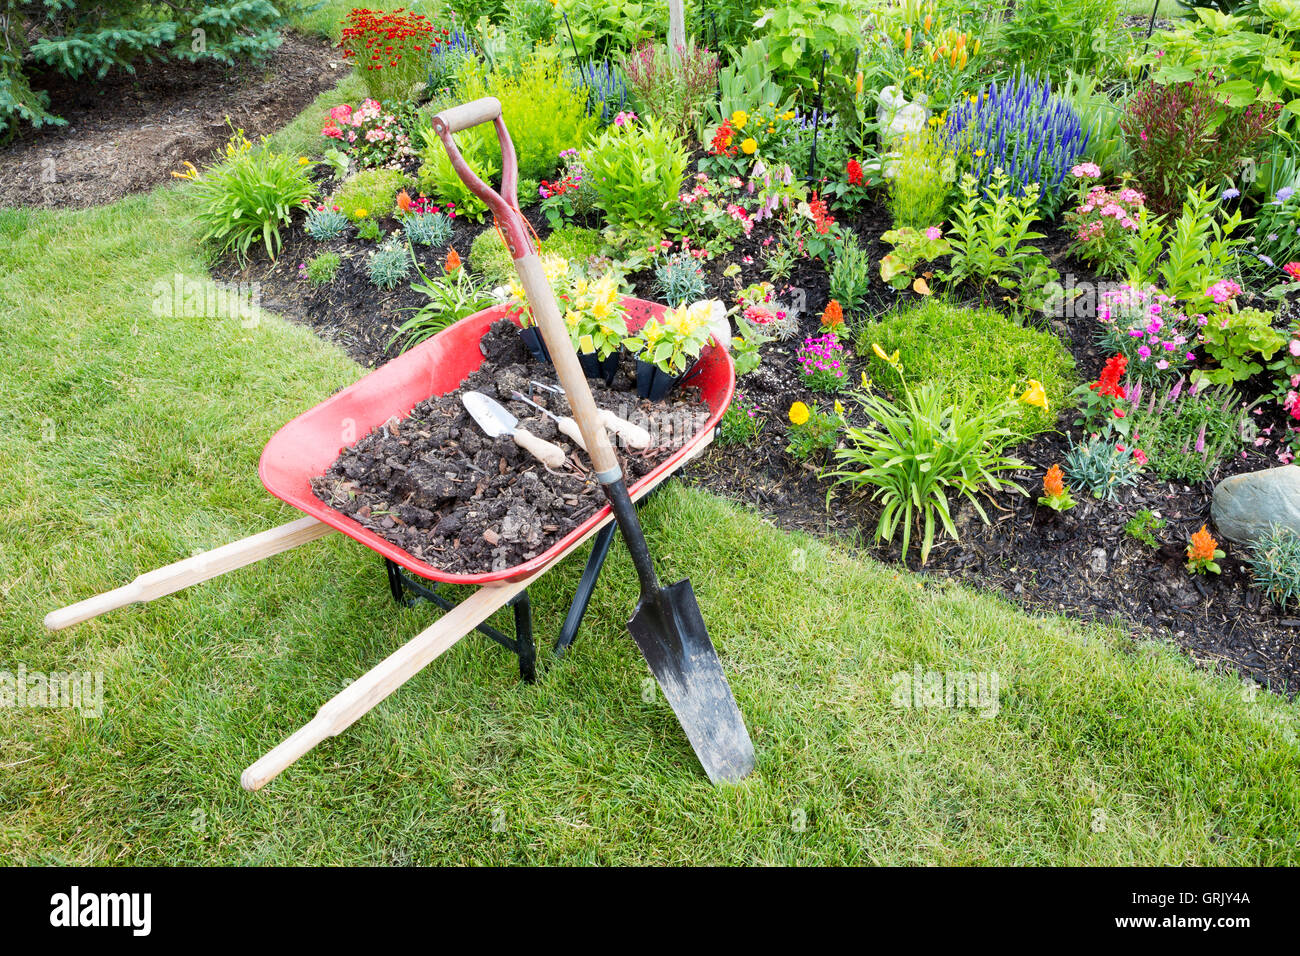 Garden work being done landscaping a flowerbed with a red wheelbarrow full of organic potting soil and celosia seedlings standin Stock Photo